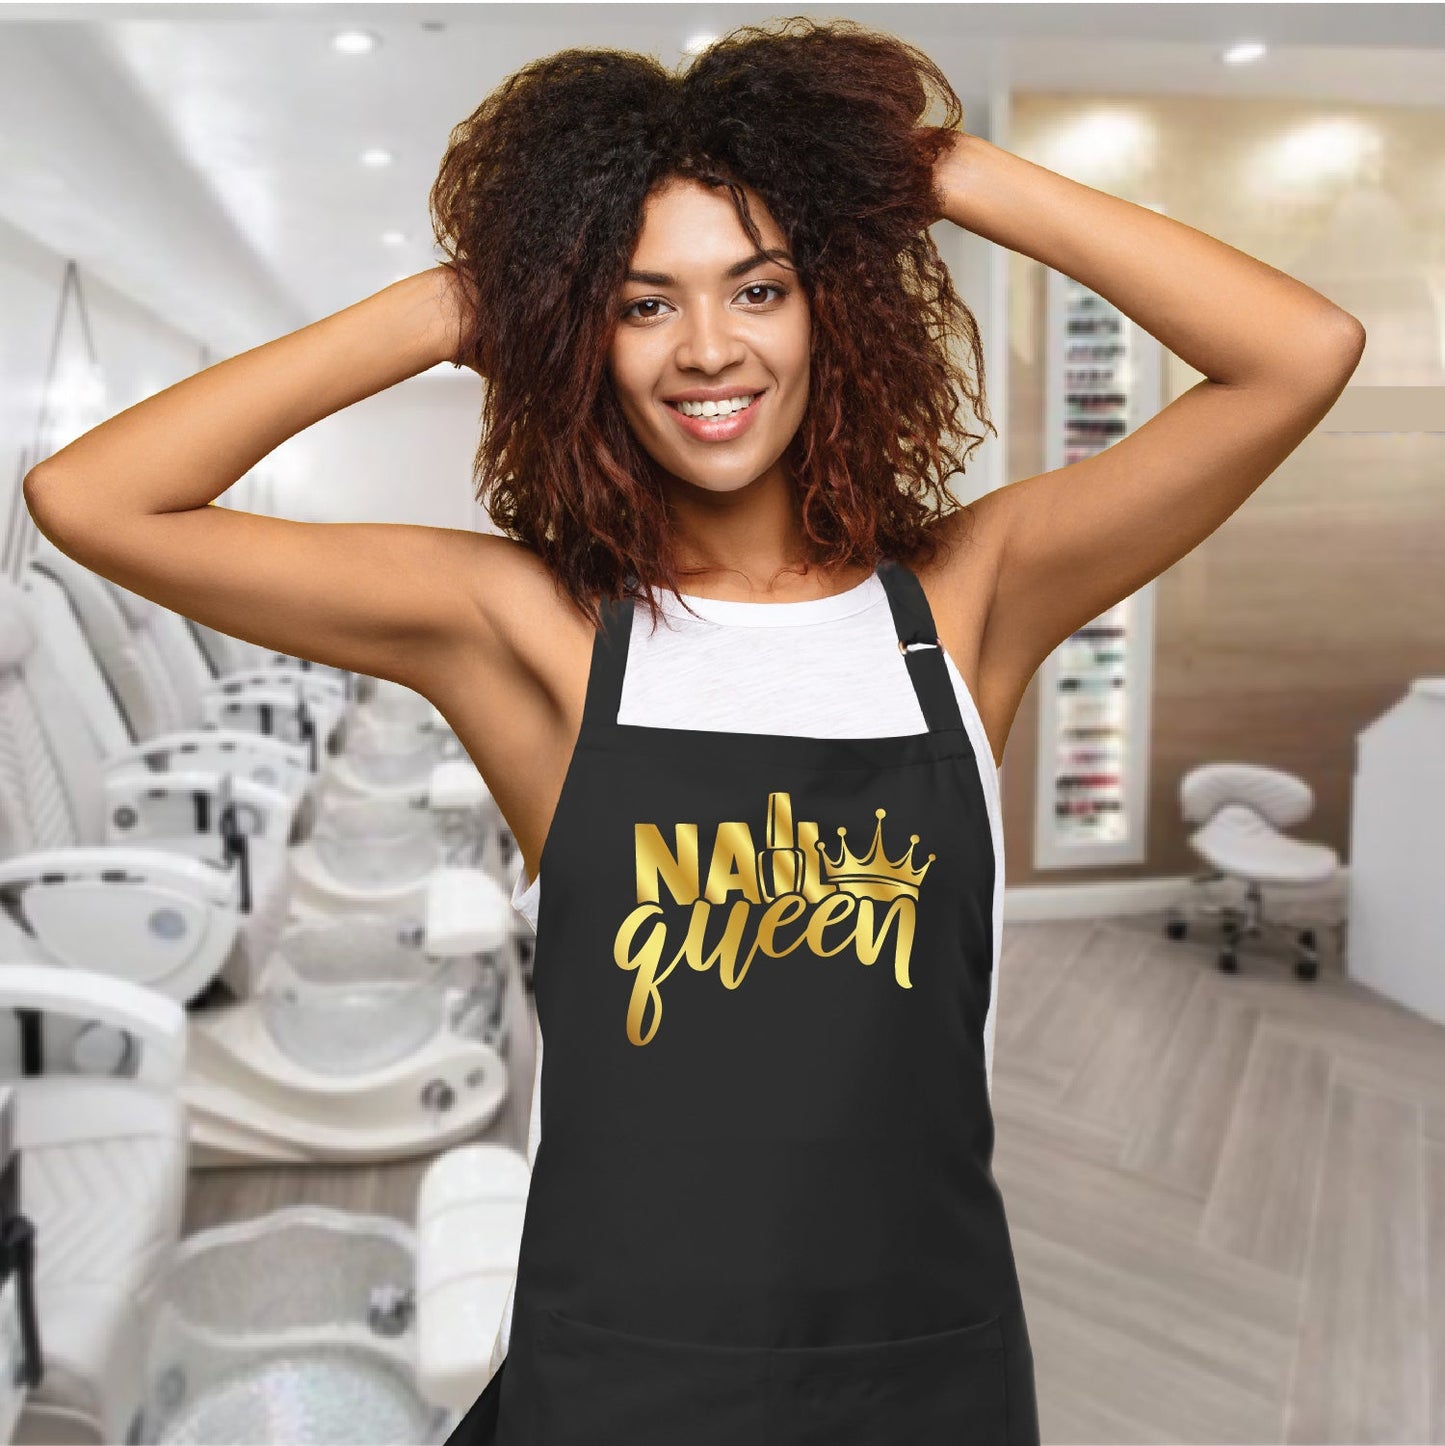 "I'm the Nail Tech They Told You About" Beauty Nail Apron